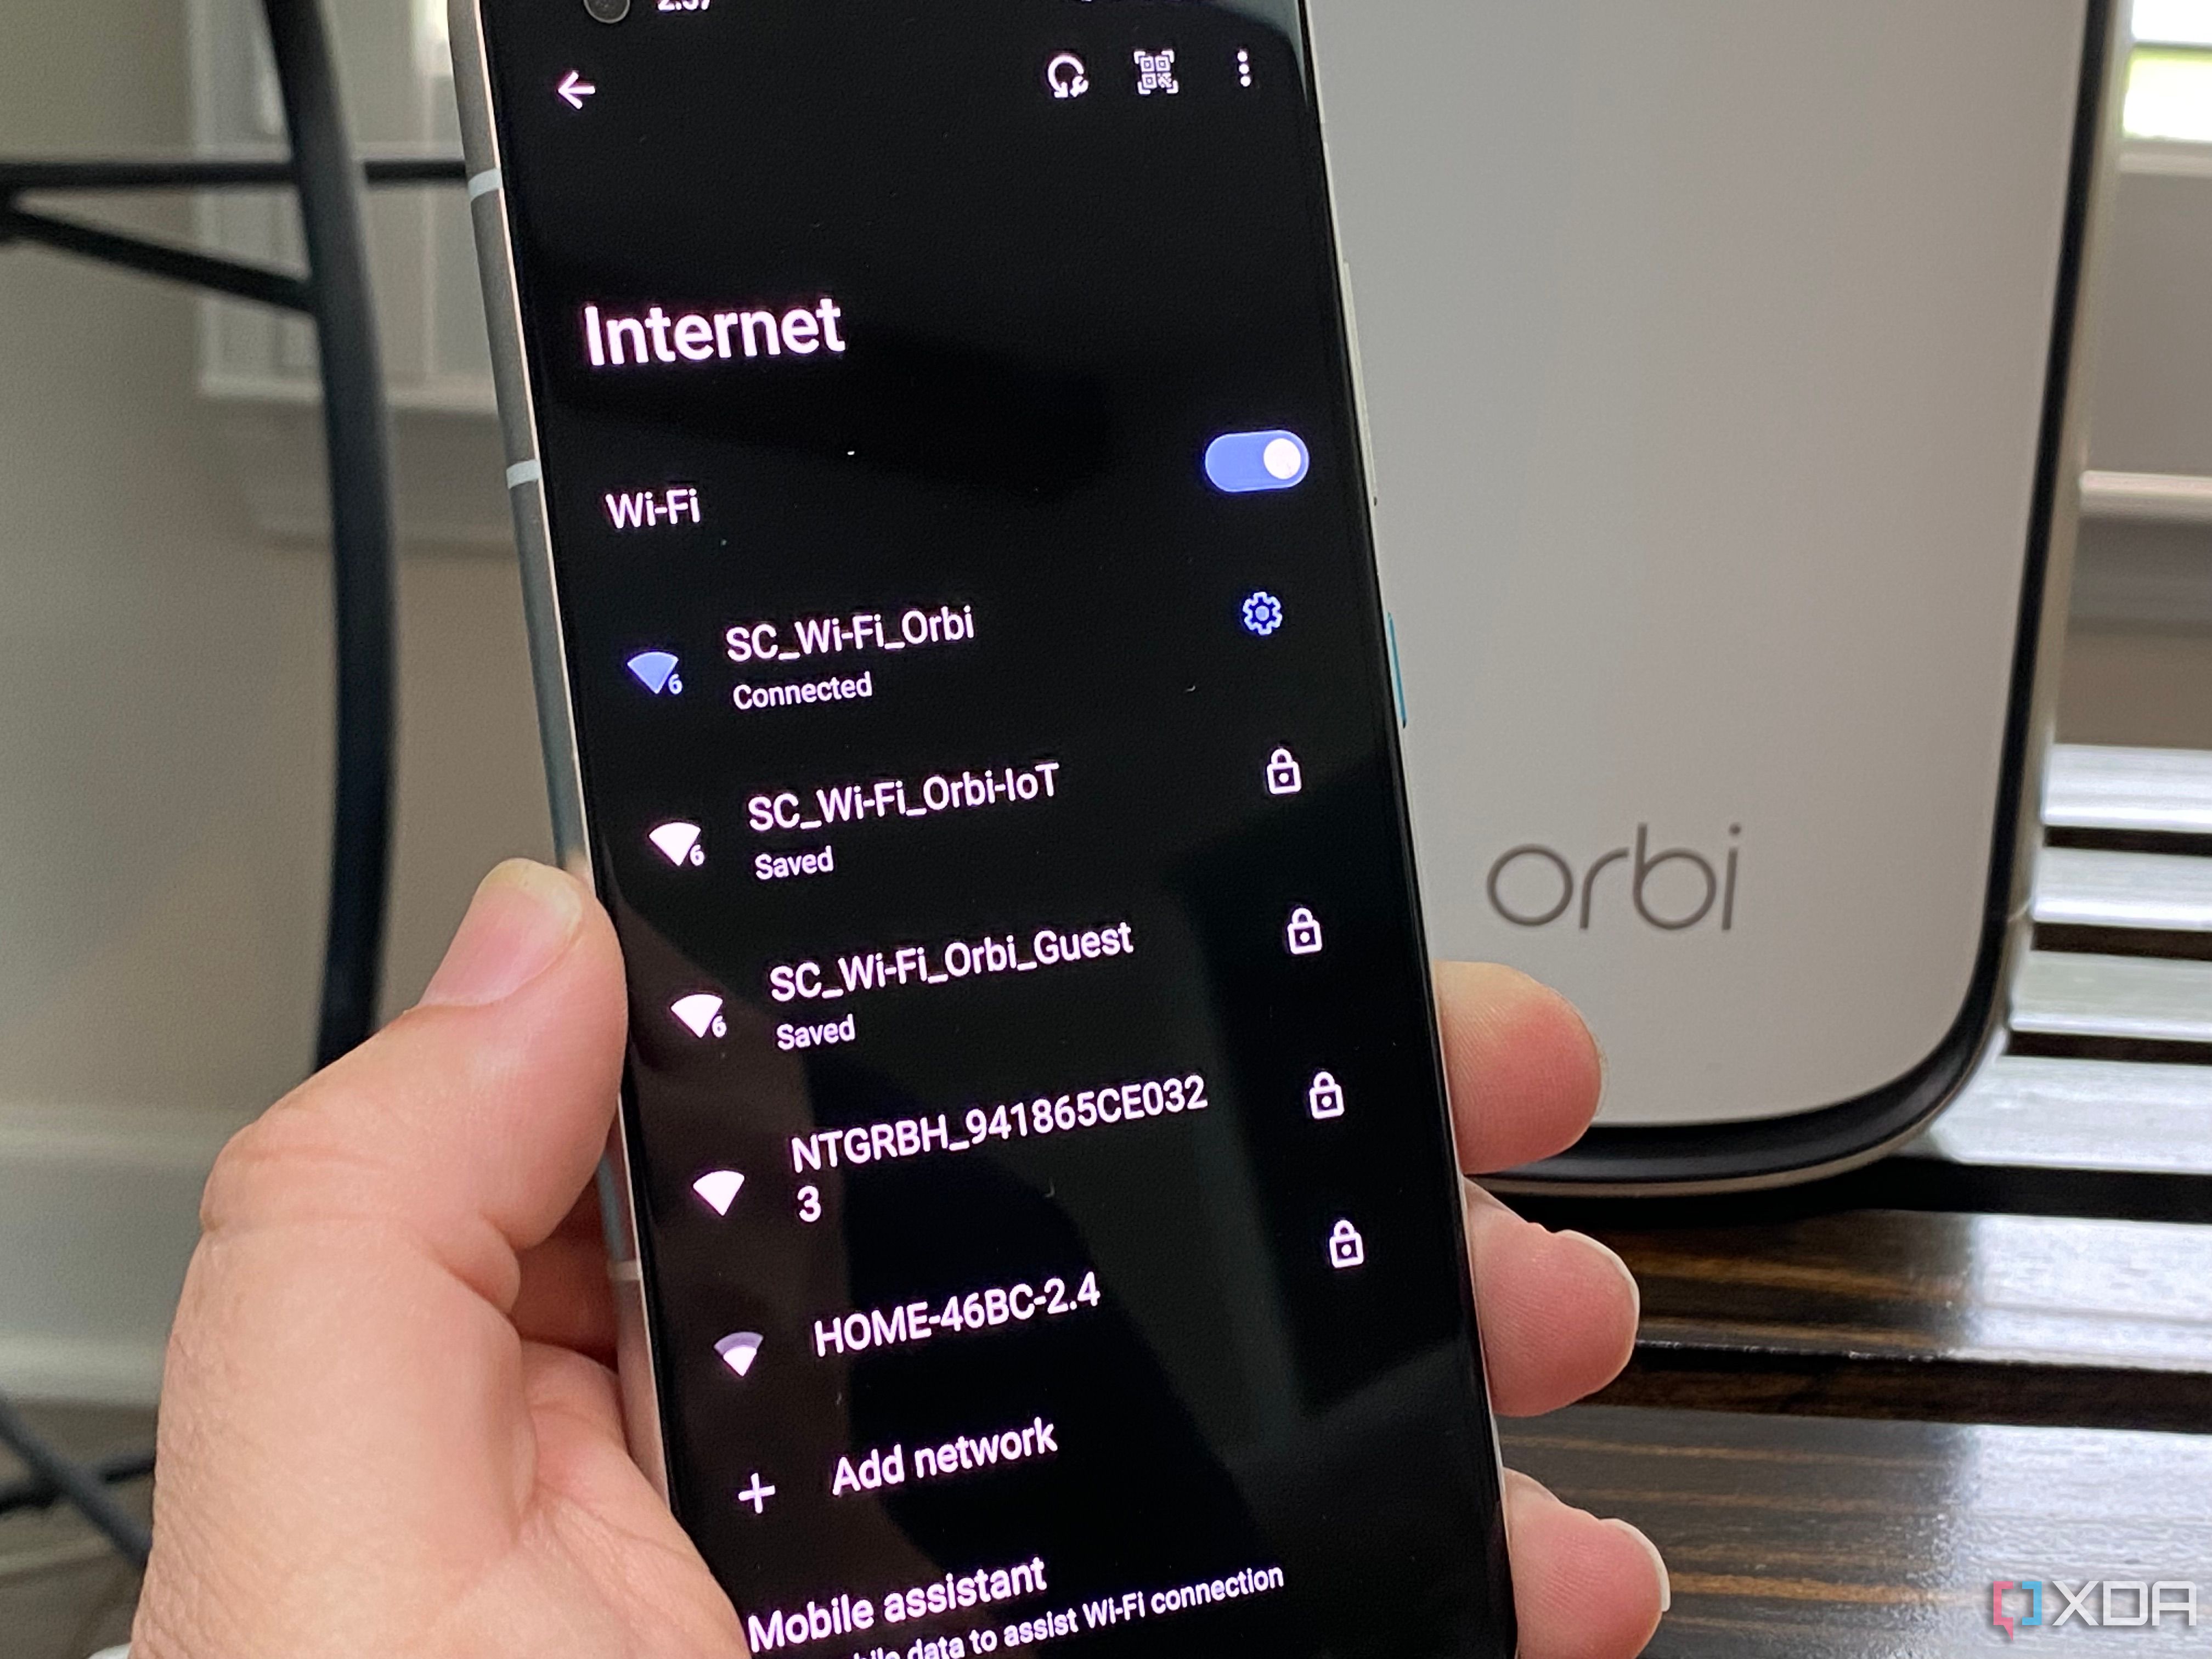 Netgear router with IoT, Guest, and standard Wi-Fi shown on an Android phone